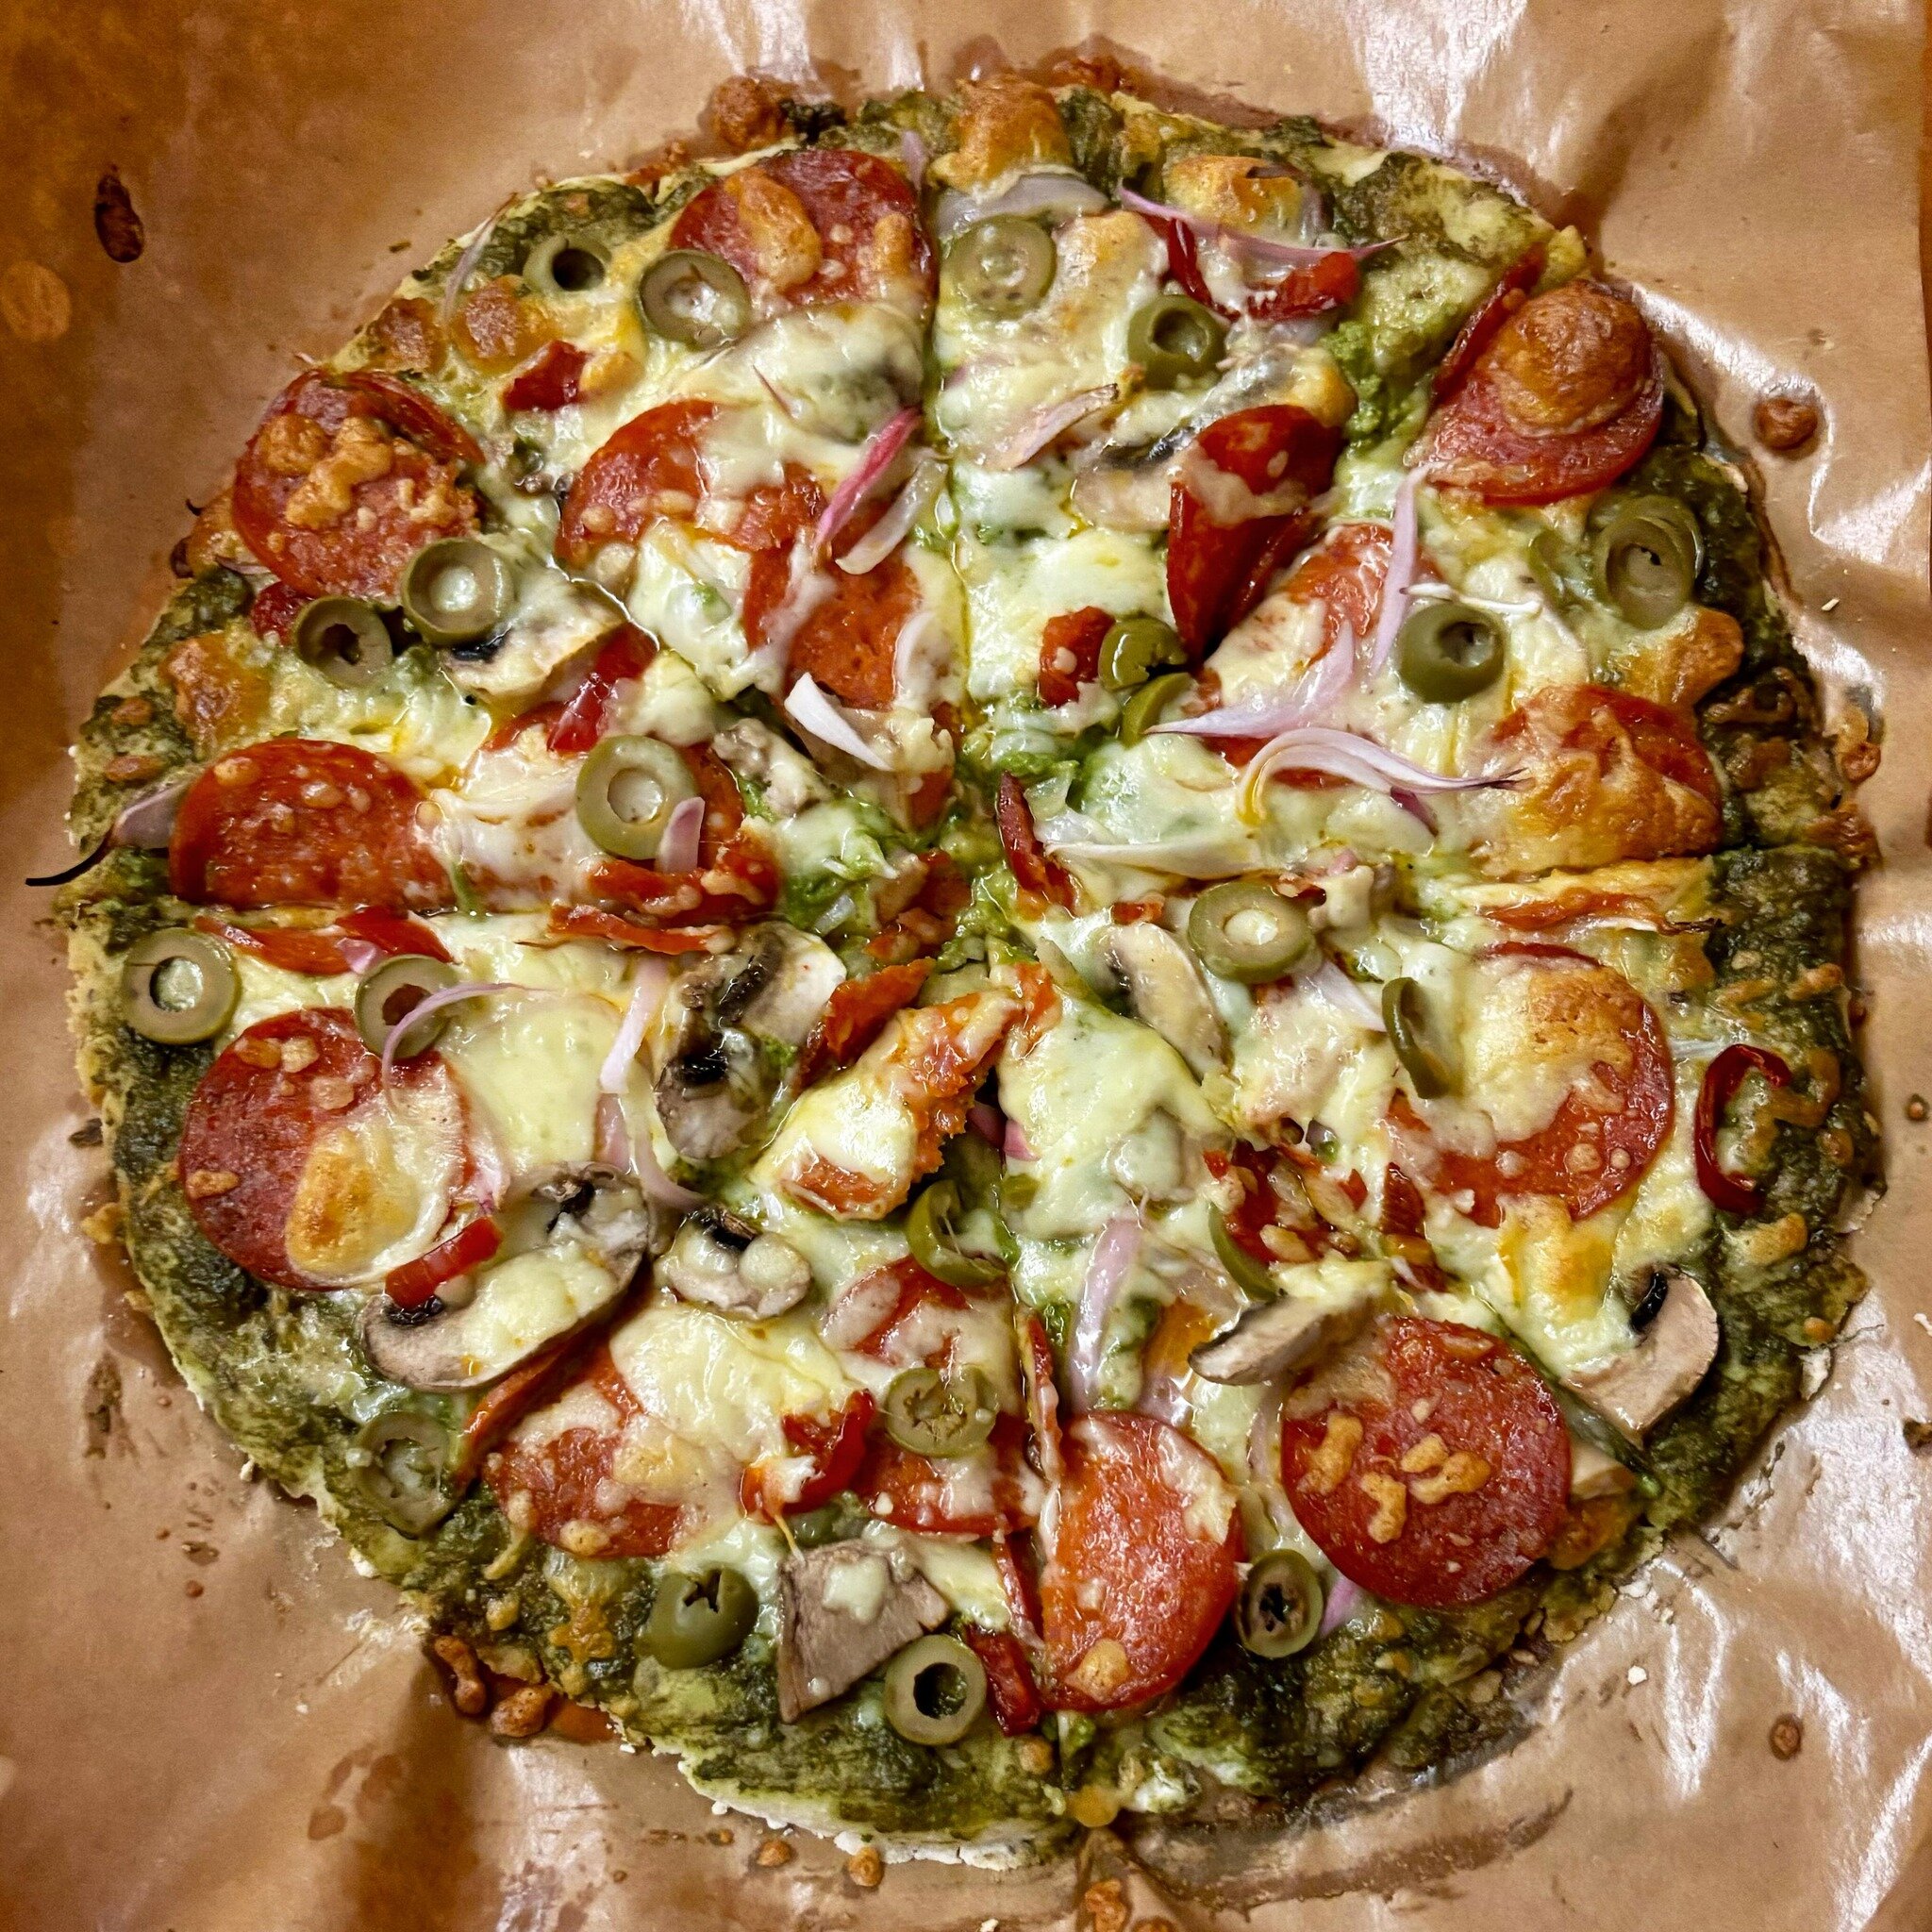 When it&rsquo;s been the kind of long day that has you craving junk food, but you&rsquo;re not allowed gluten, yeast, or tomatoes, you make yourself a gluten free, yeast free, pesto pizza with mushrooms, pepperoni, and olives. Cravings satisfied!